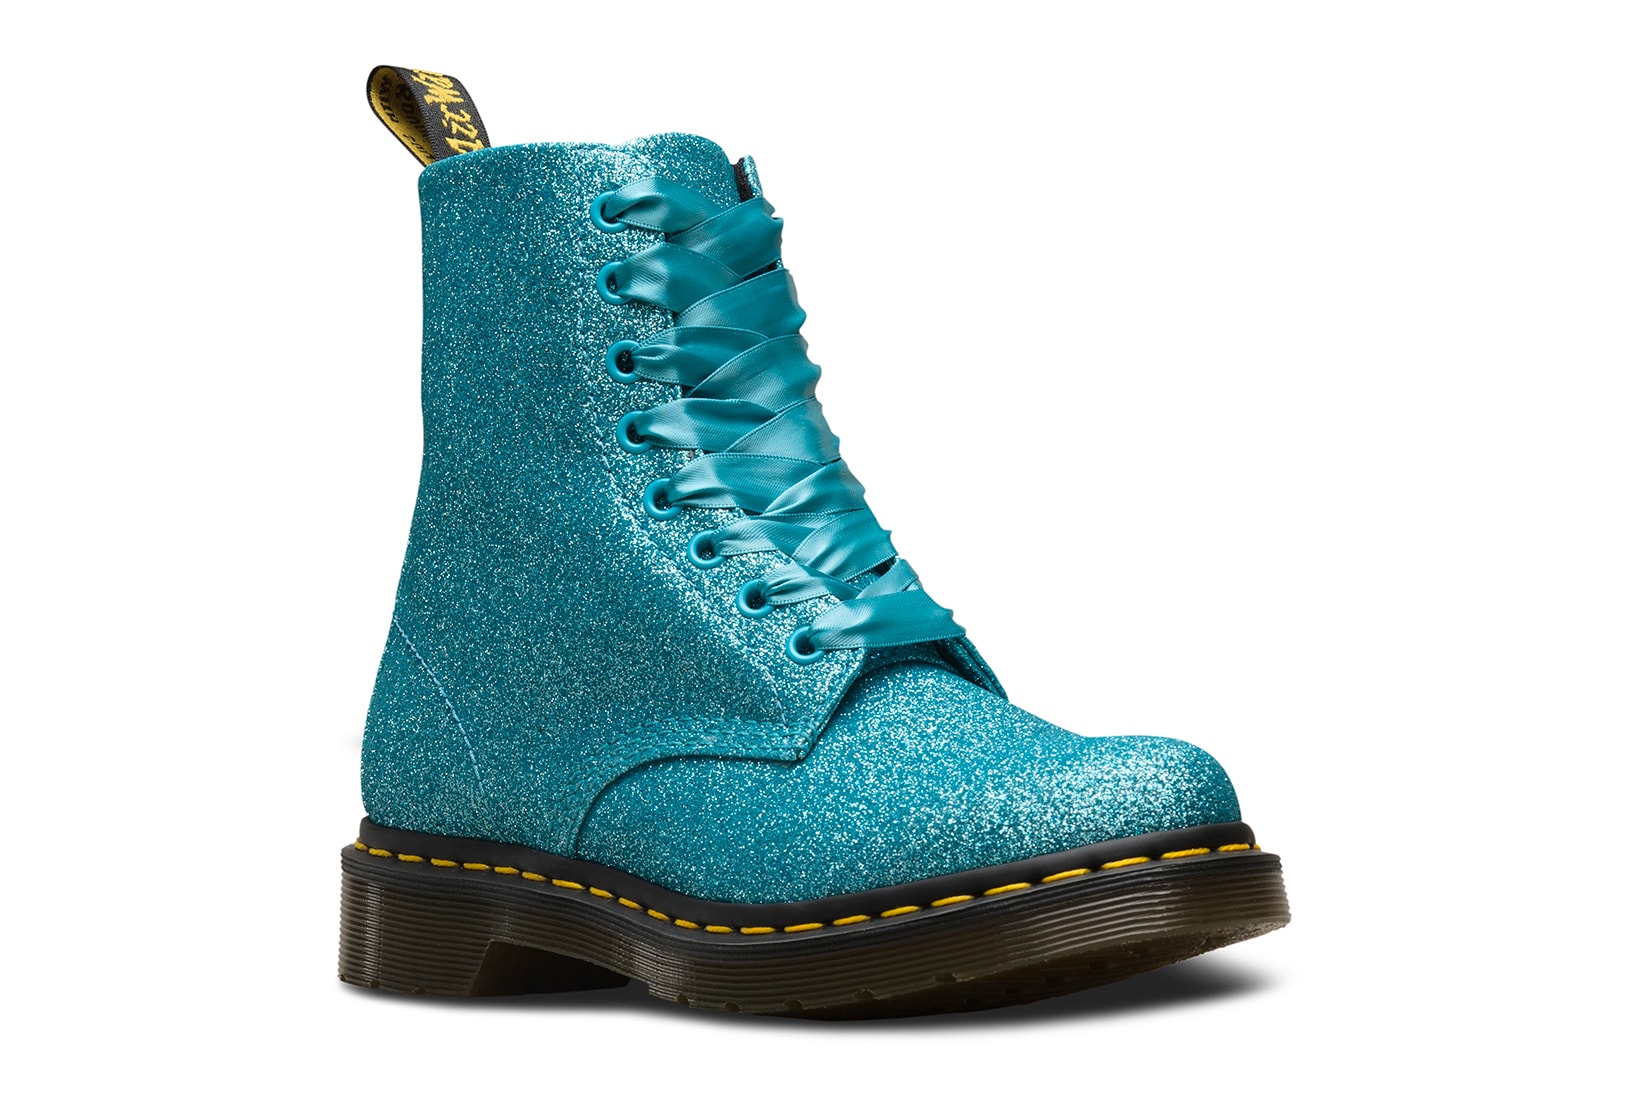 Dr. Doc Martens 1460 Pascal Glitter Boots Pale Gold Pewter Silver Turquoise Purple